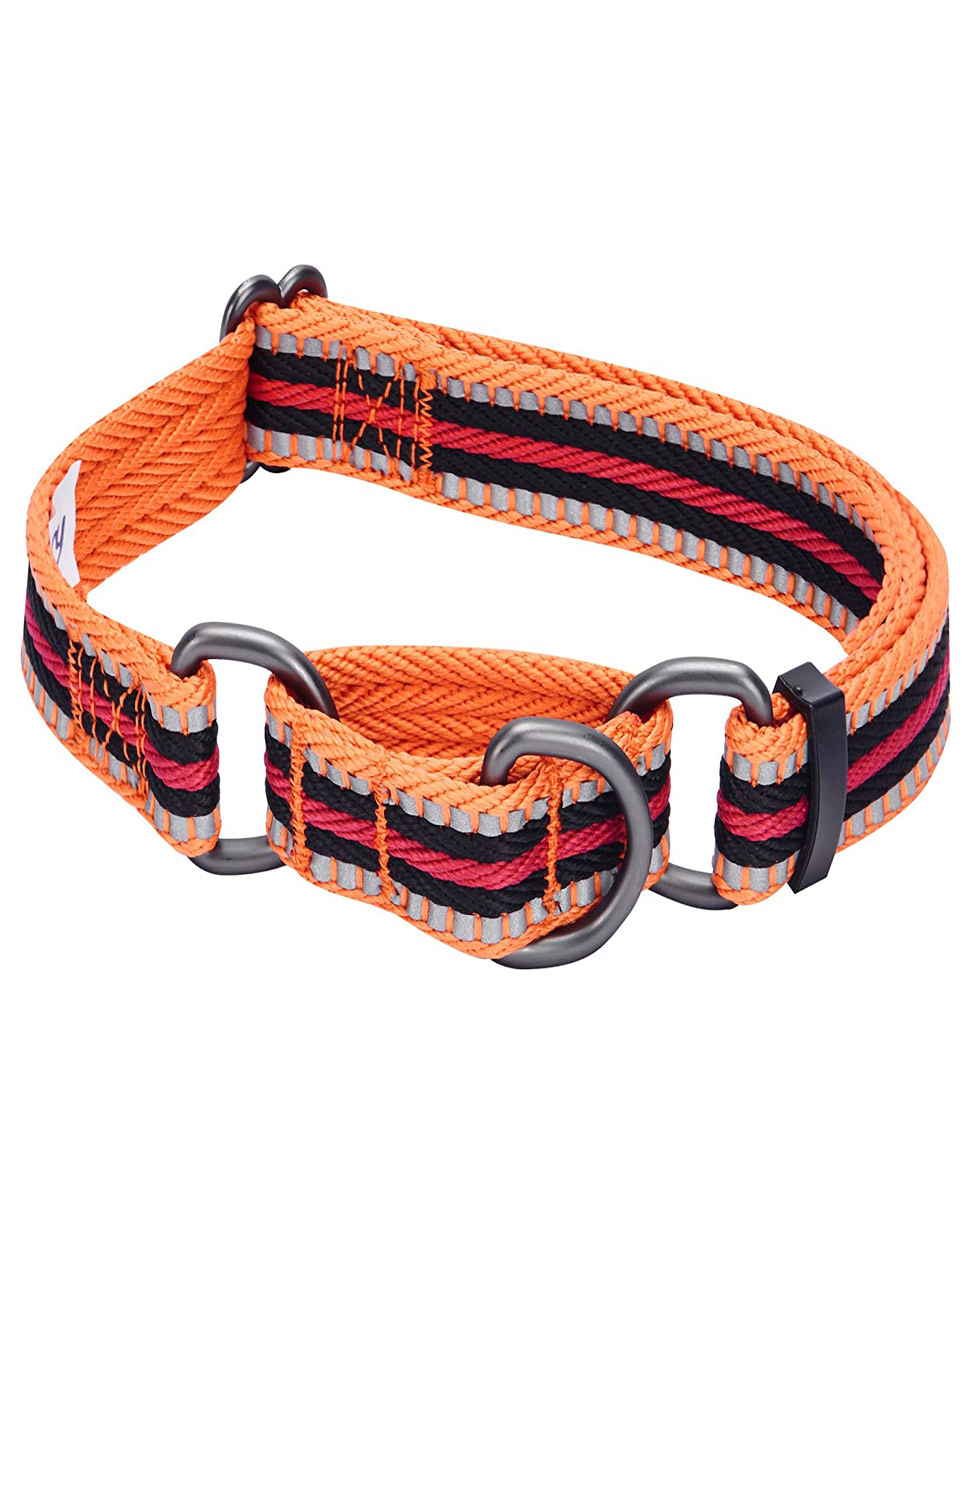 Blueberry Comfy Reflective Martingale Collar   